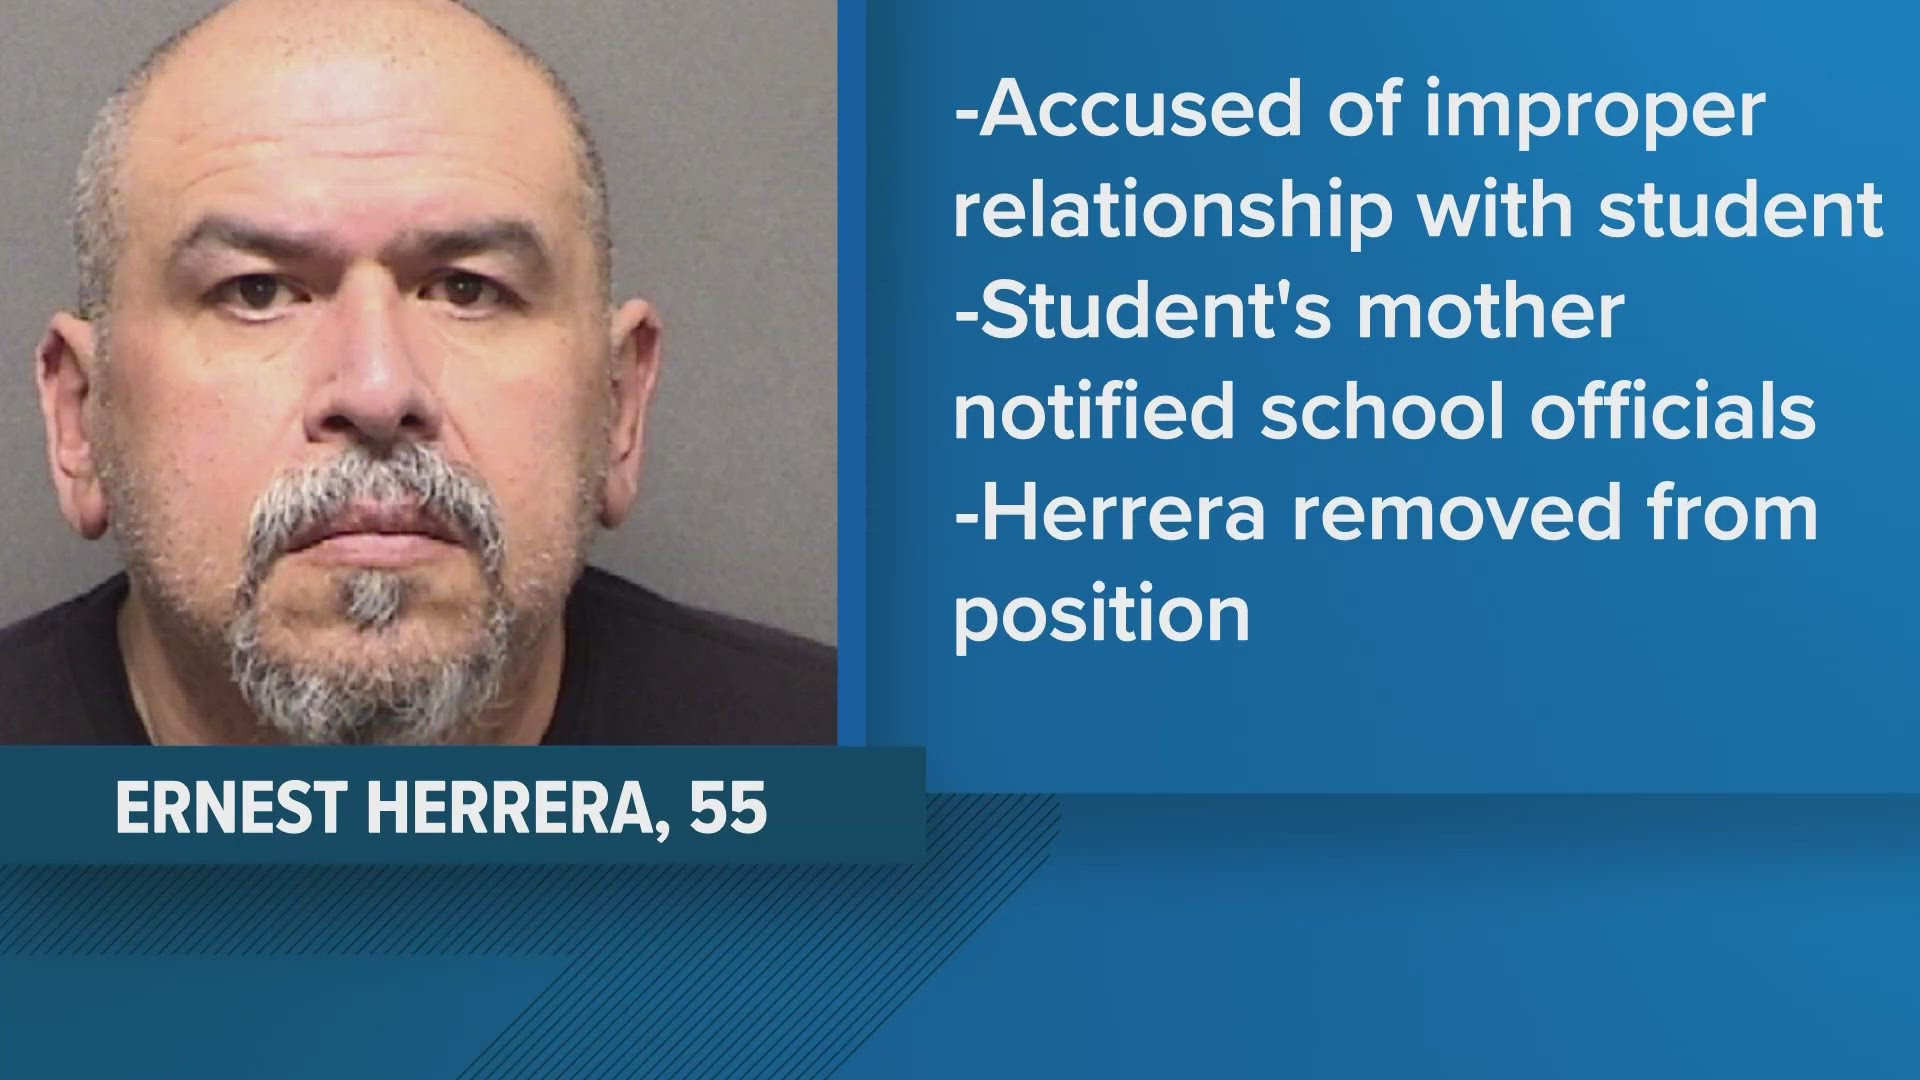 The eighth grade teacher was terminated from his position, officials say.